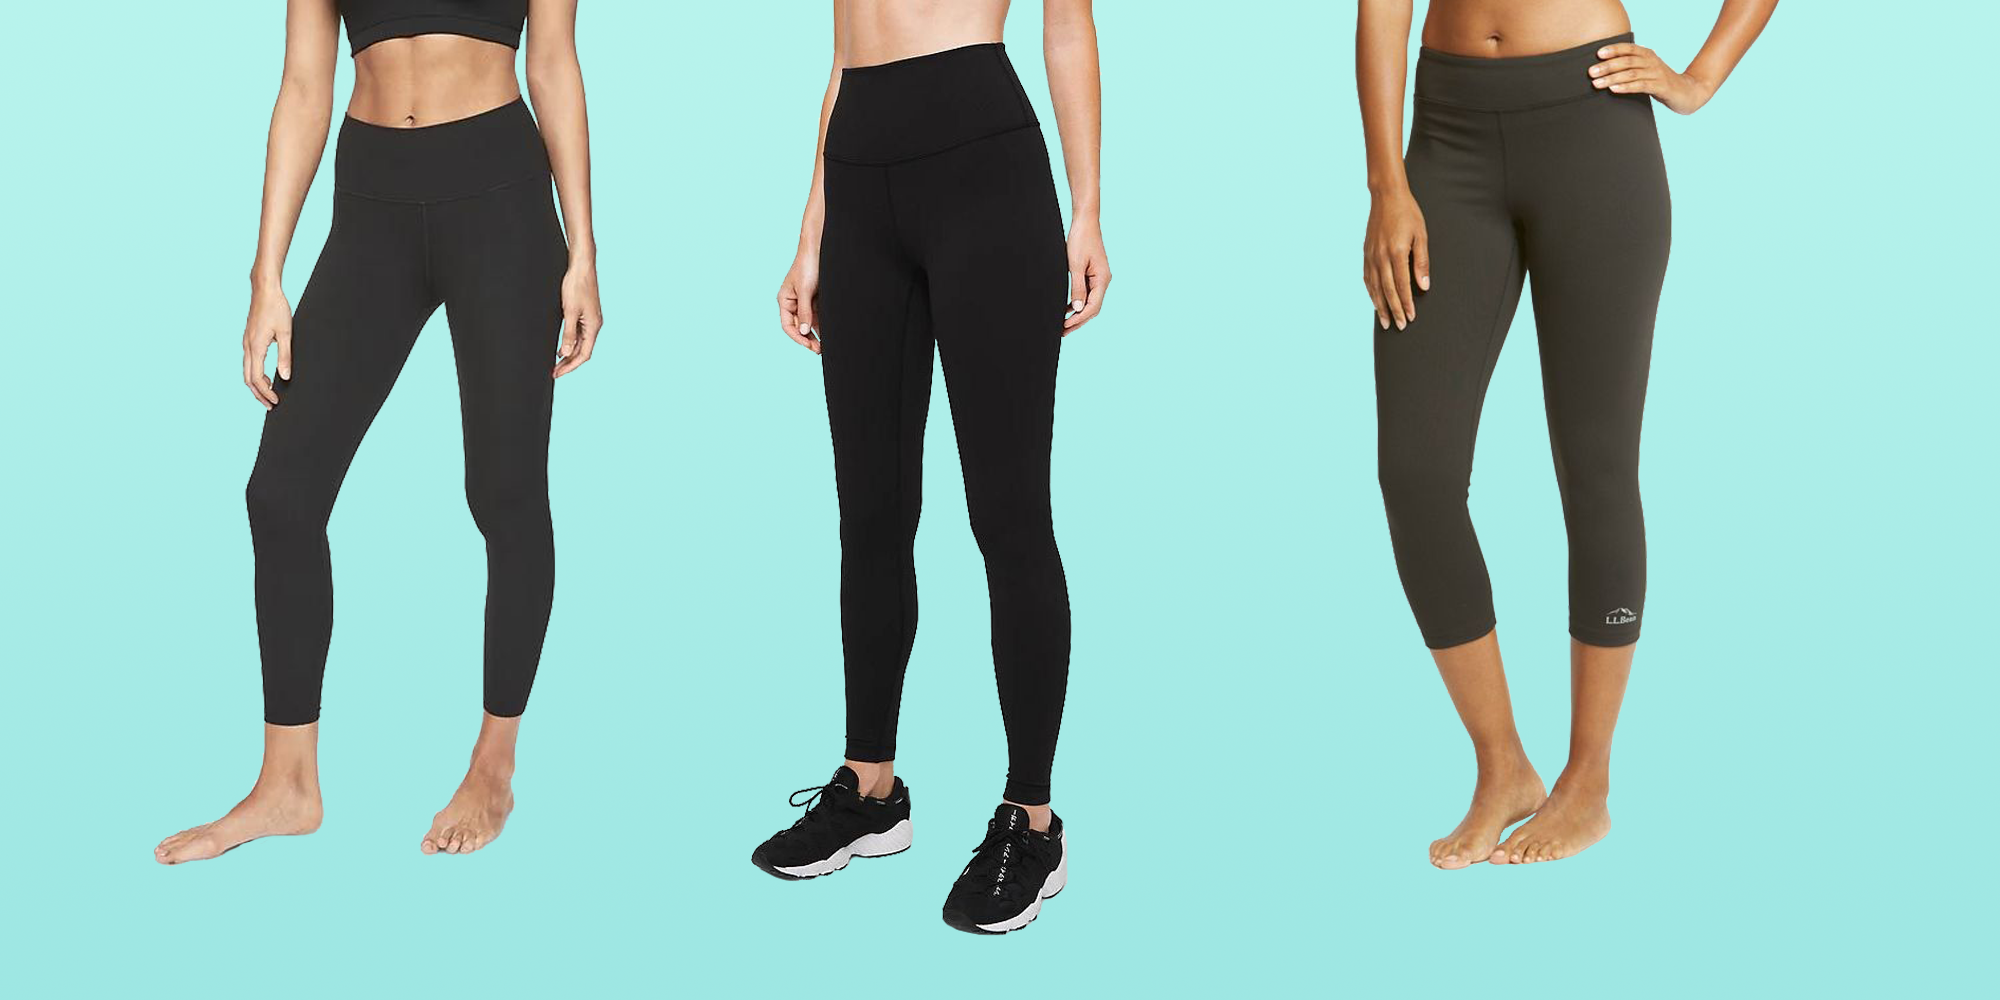 Trendy Leggings On Sale At Max And Me Sport